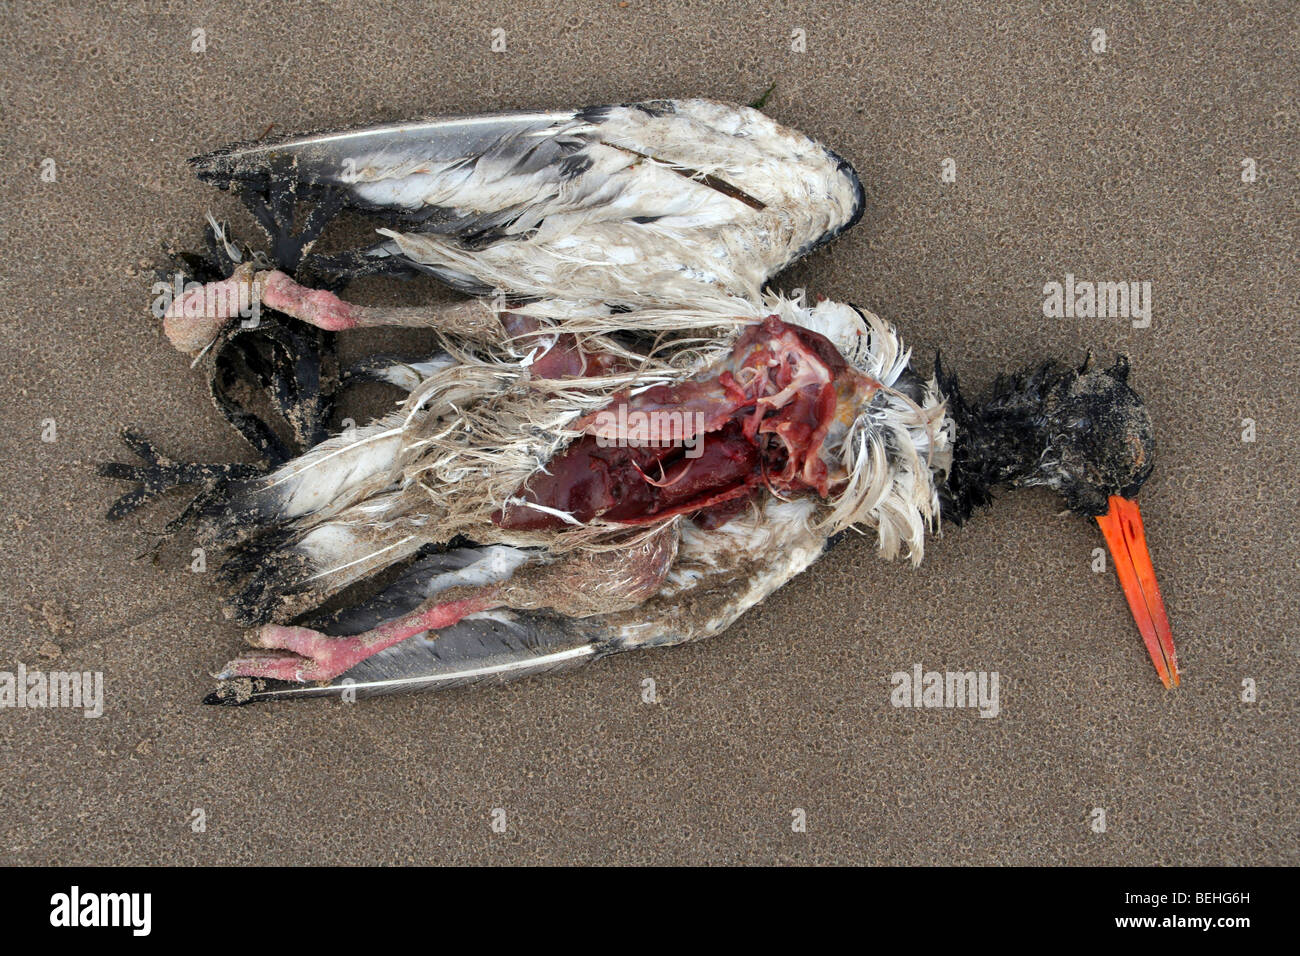 Dead Eurasian Oystercatcher Haematopus ostralegus Washed up On THe Beach At New Brighton, The Wirral, Merseyside, UK Stock Photo